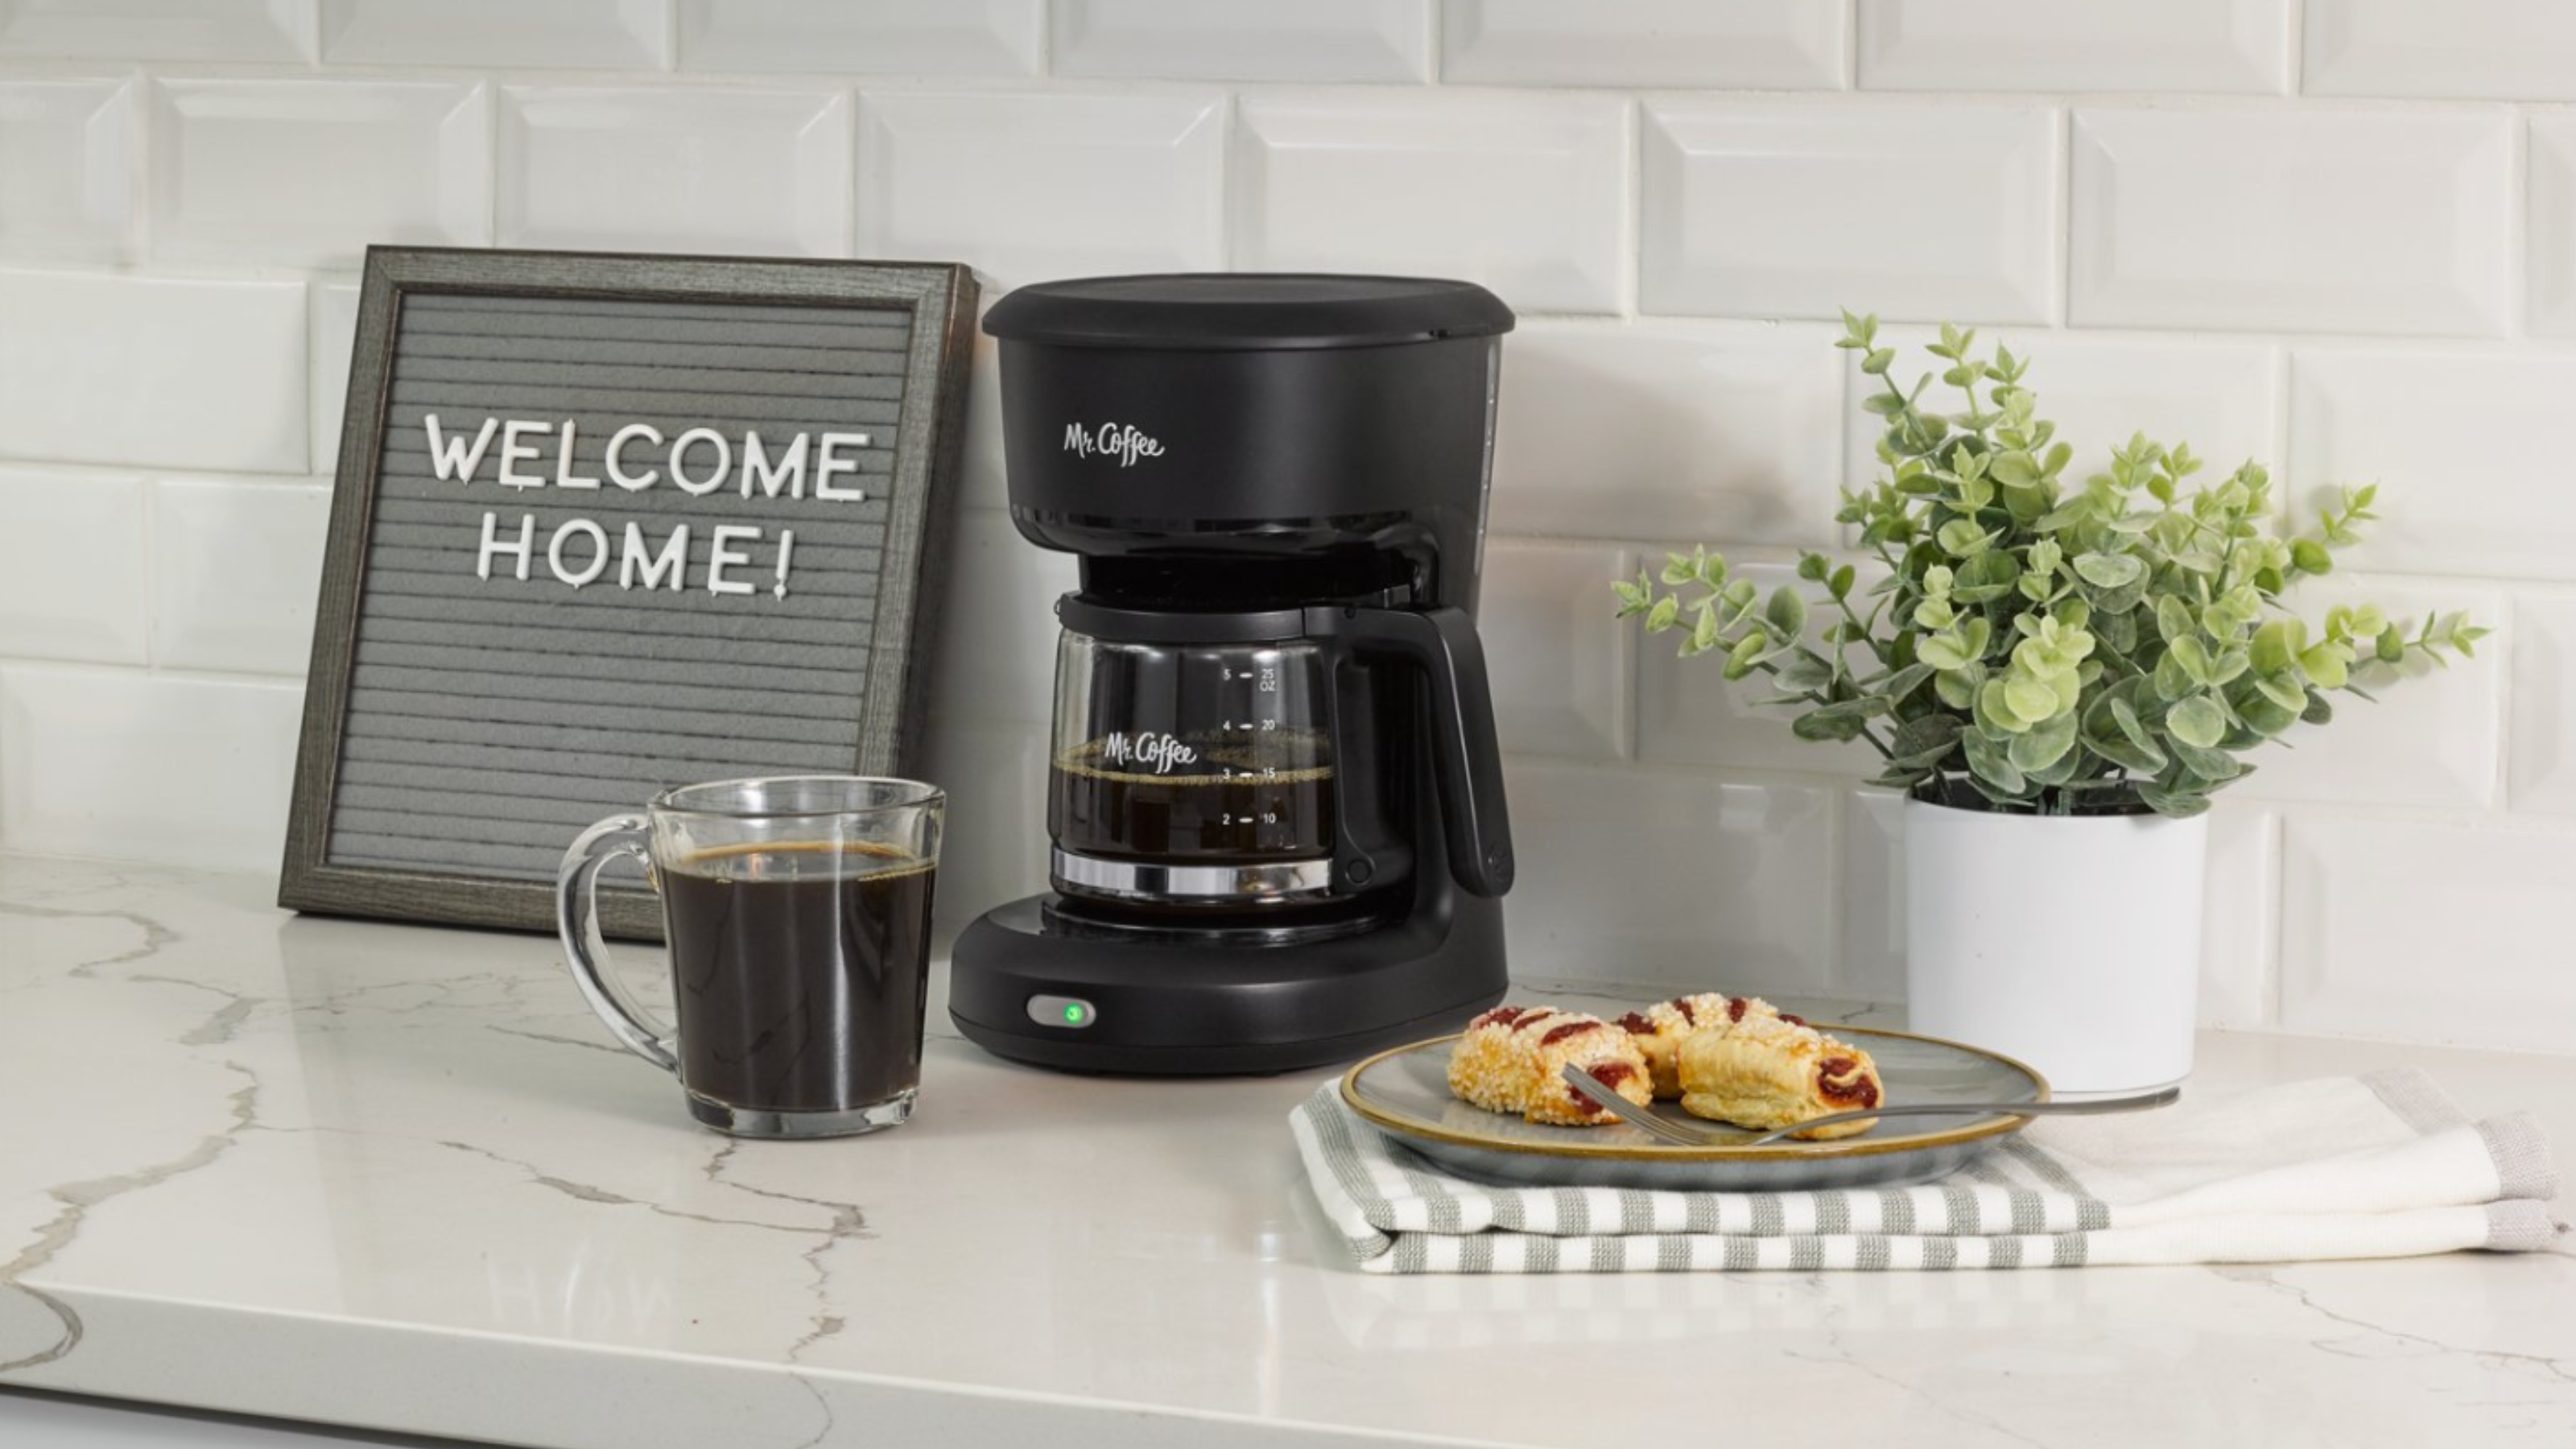 Krups Simply Brew Coffee Maker Review - Consumer Reports